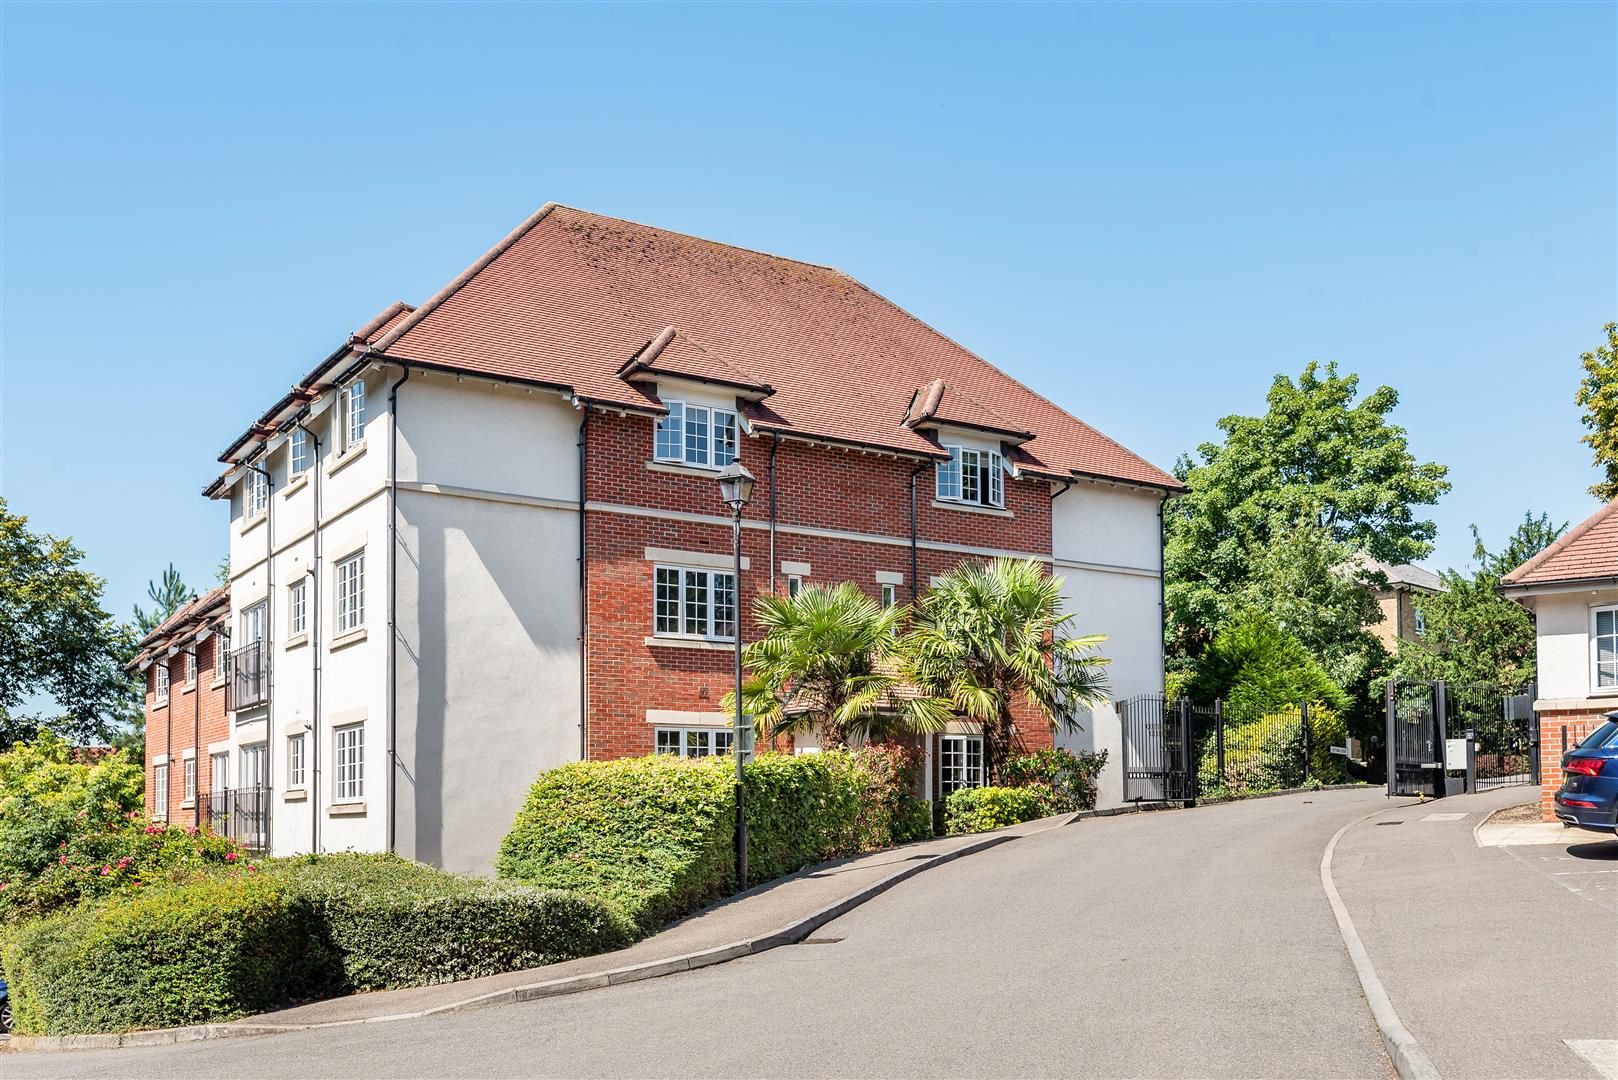 Sycamore Lodge, Cottage Close, Harrow on the Hill, Middlesex, HA2 0HA